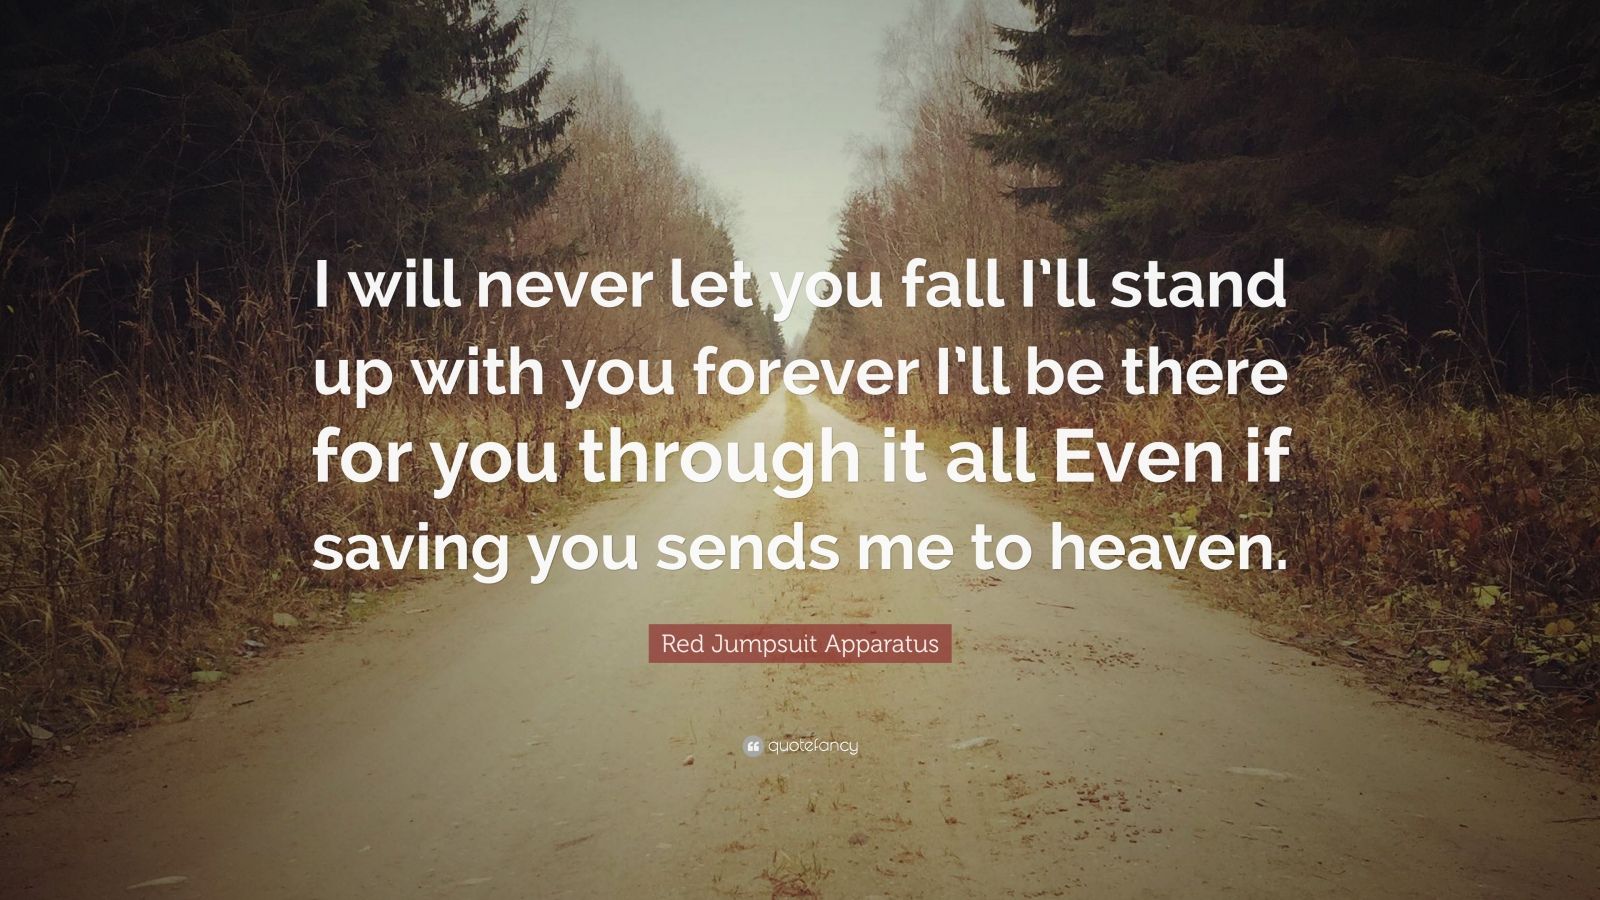 375227 Red Jumpsuit Apparatus Quote I will never let you fall I ll stand